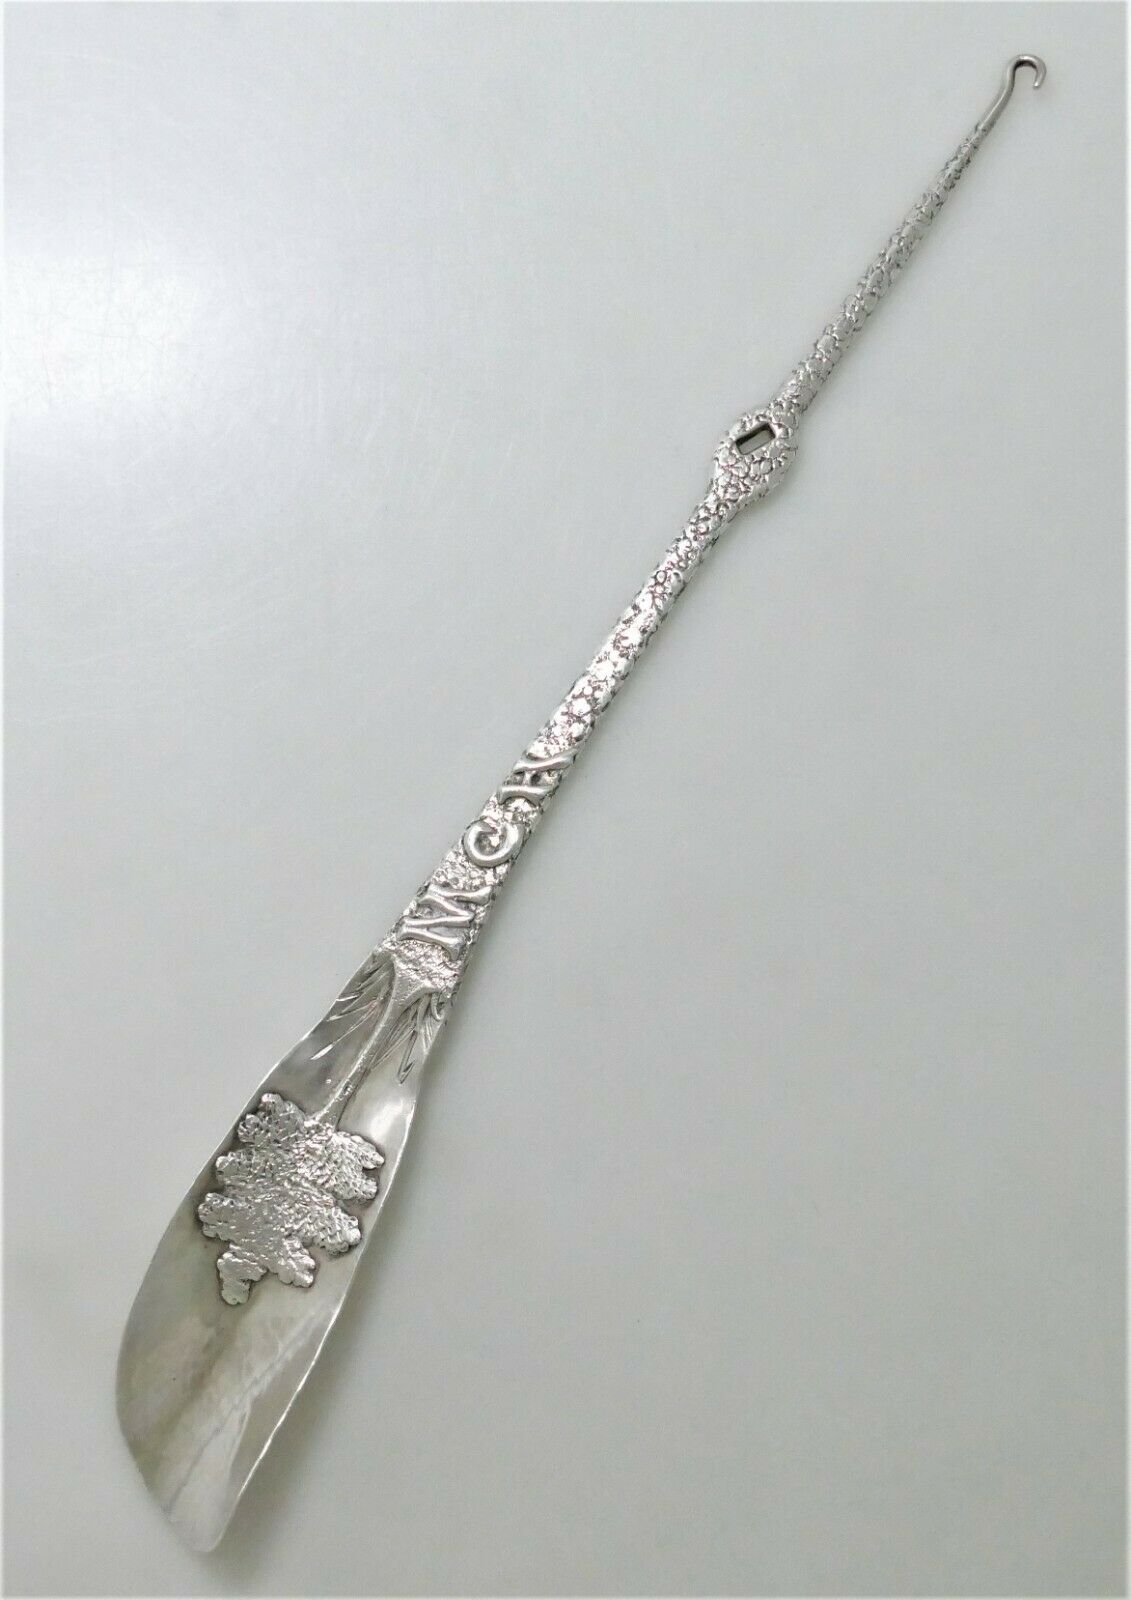 ONE-OF-A-KIND George Shiebler Sterling Silver Aesthetic Motif Shoe Horn 1880